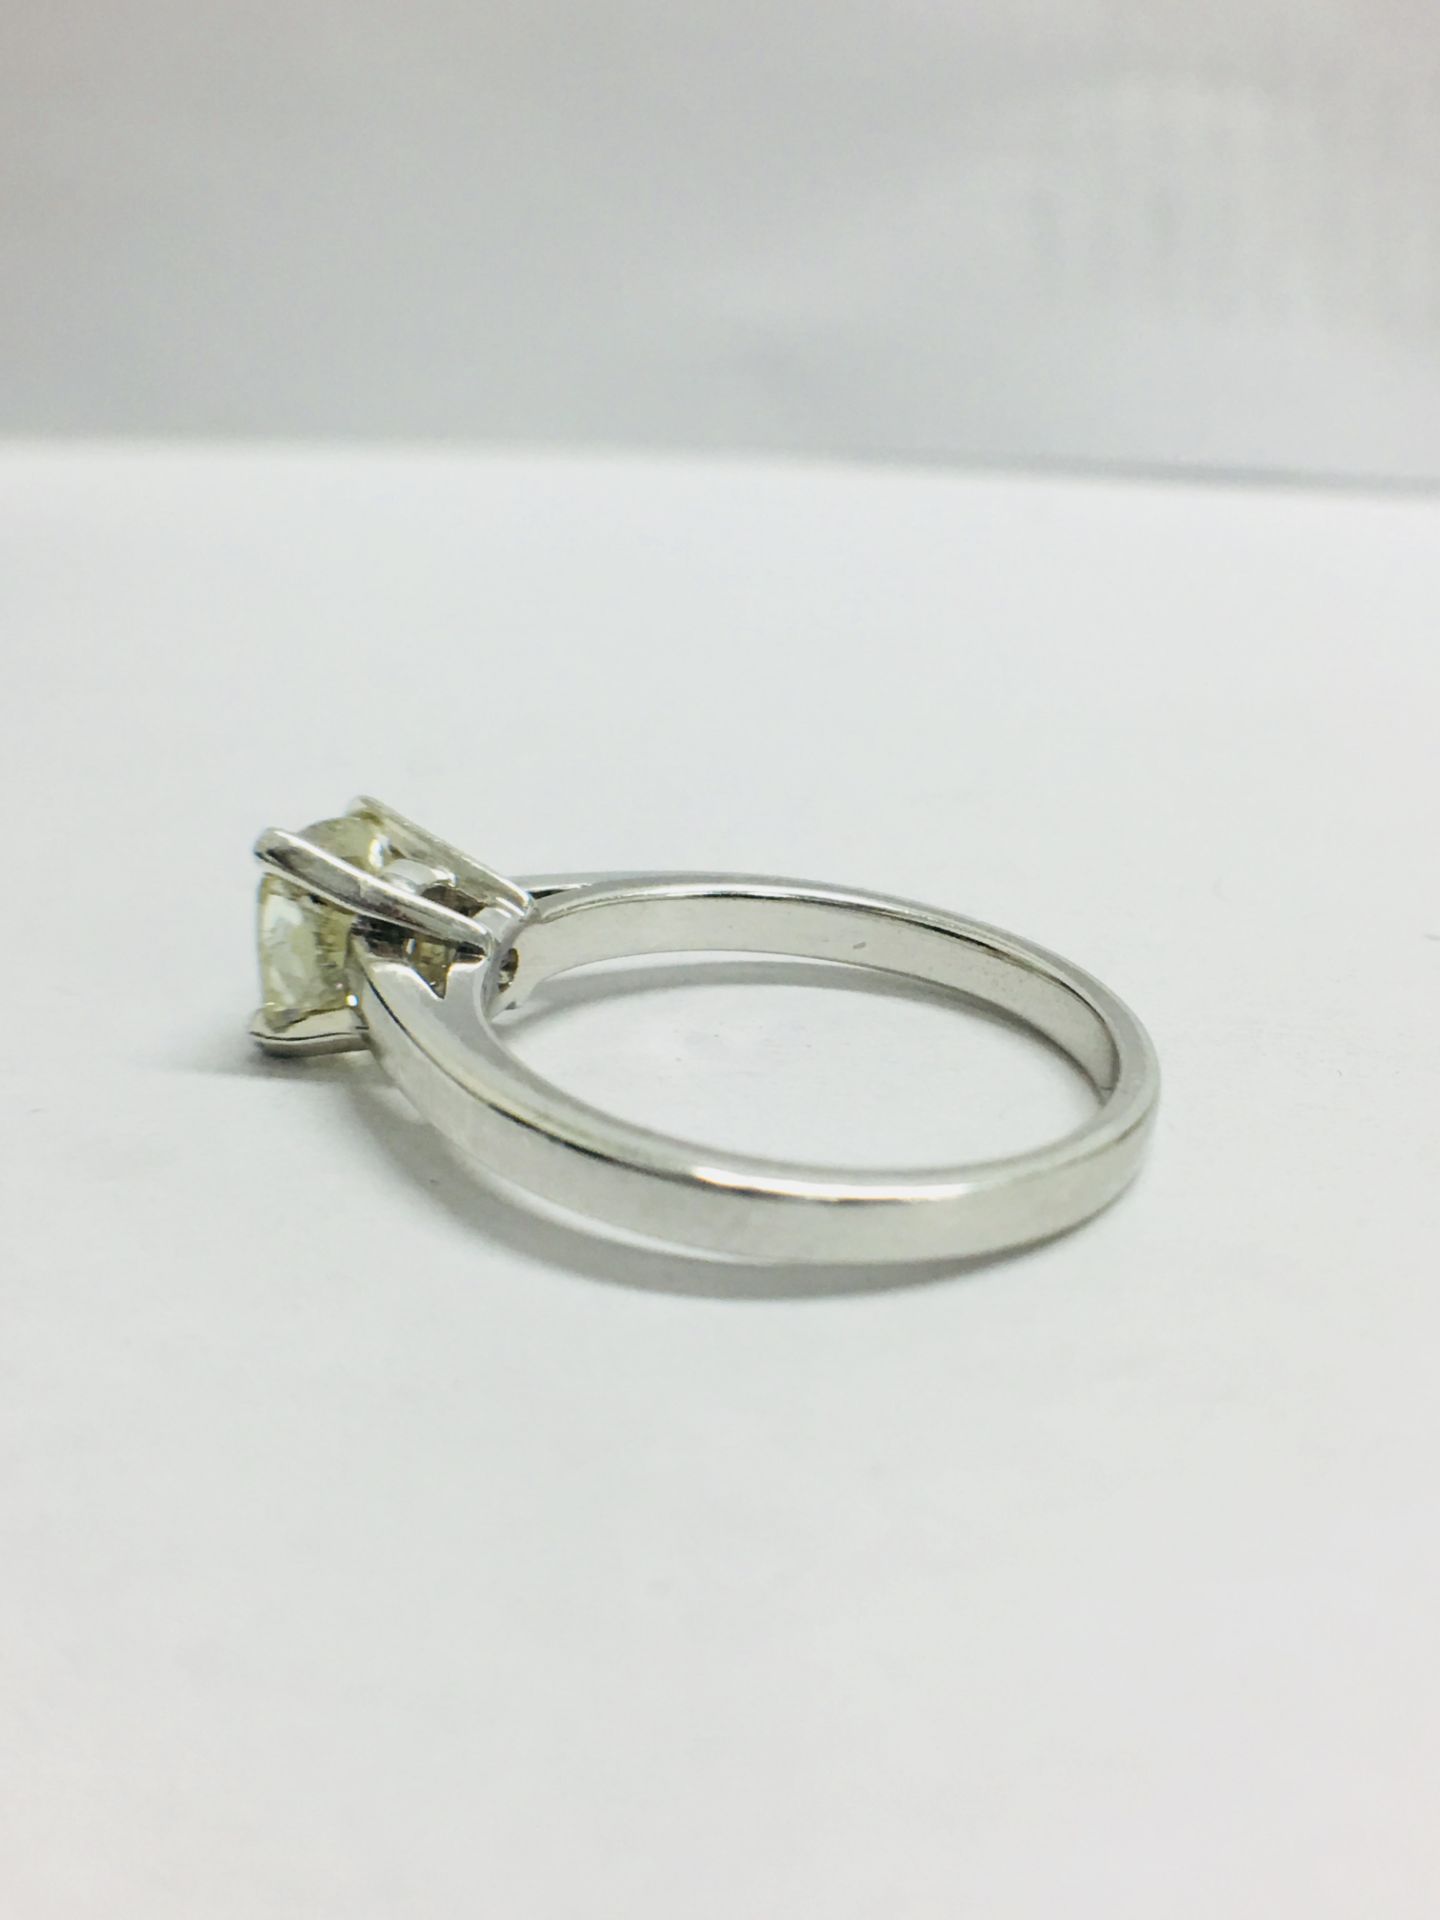 1.00ct diamond solitaire ring with a Cushion cut diamond. J colour and I1 clarity enhanced stone. - Image 4 of 7